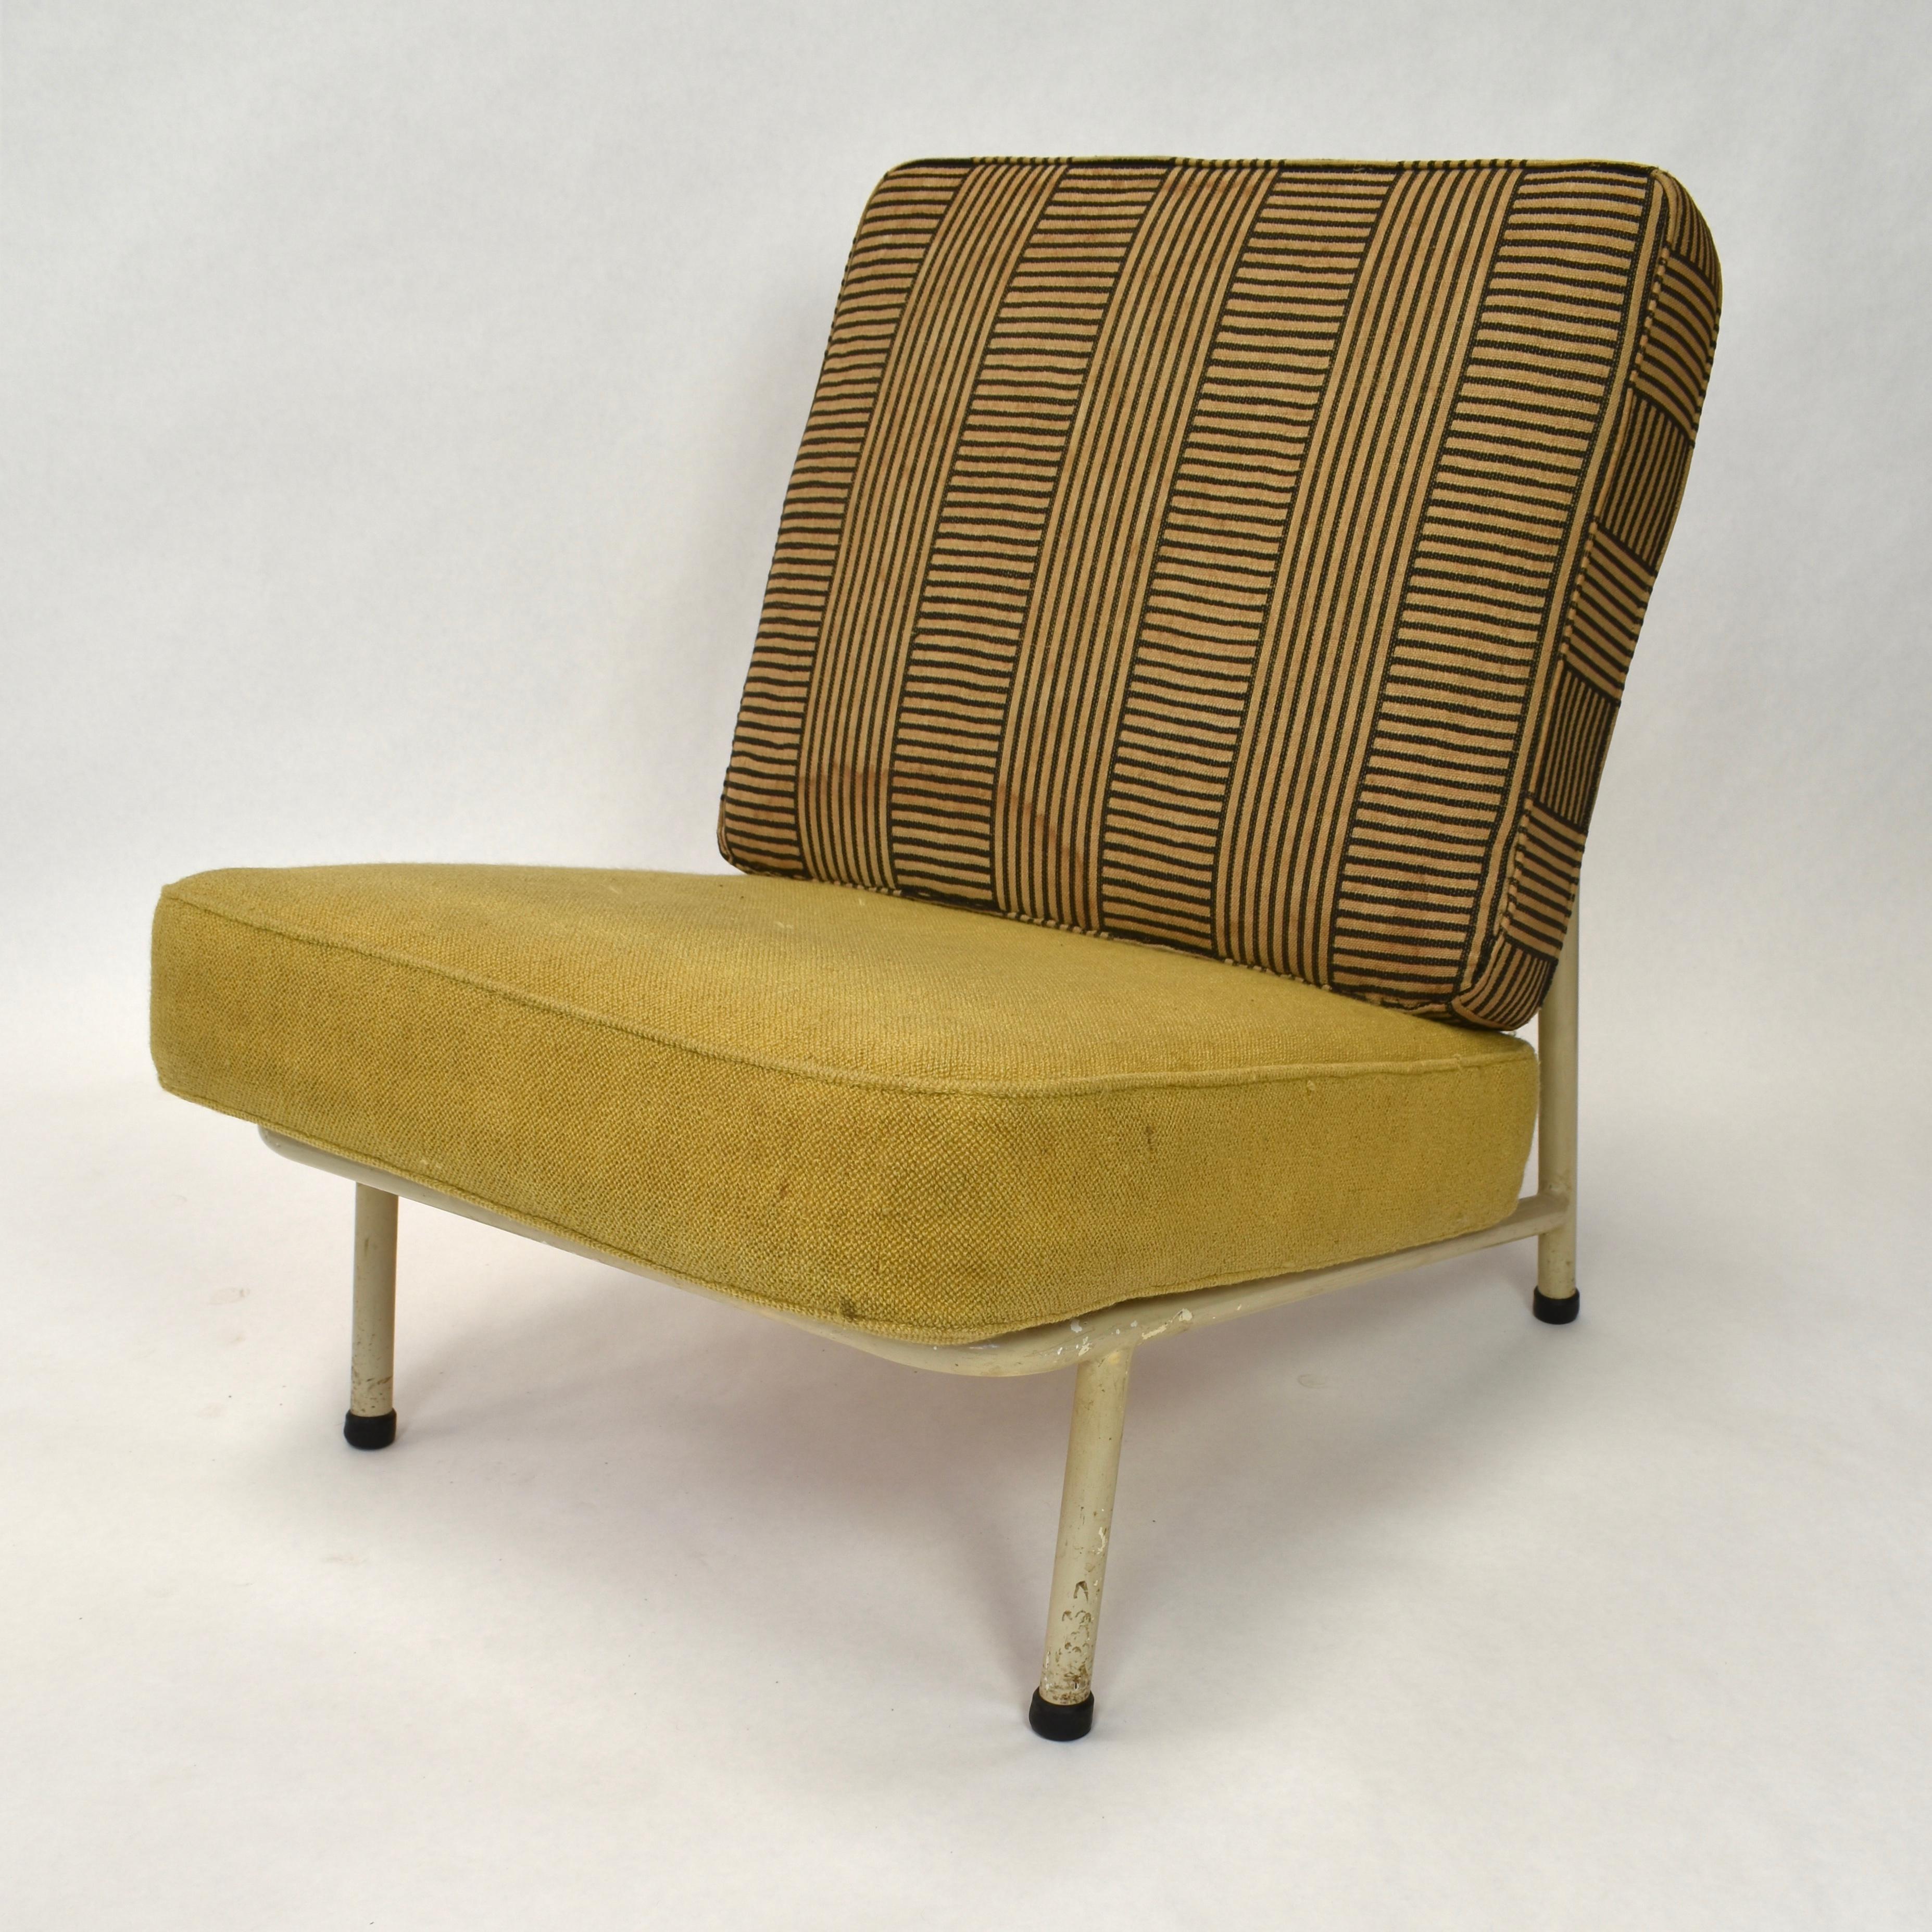 Mid-Century Modern Set of Three Alf Svensson Lounge Chairs for DUX, Sweden, circa 1950